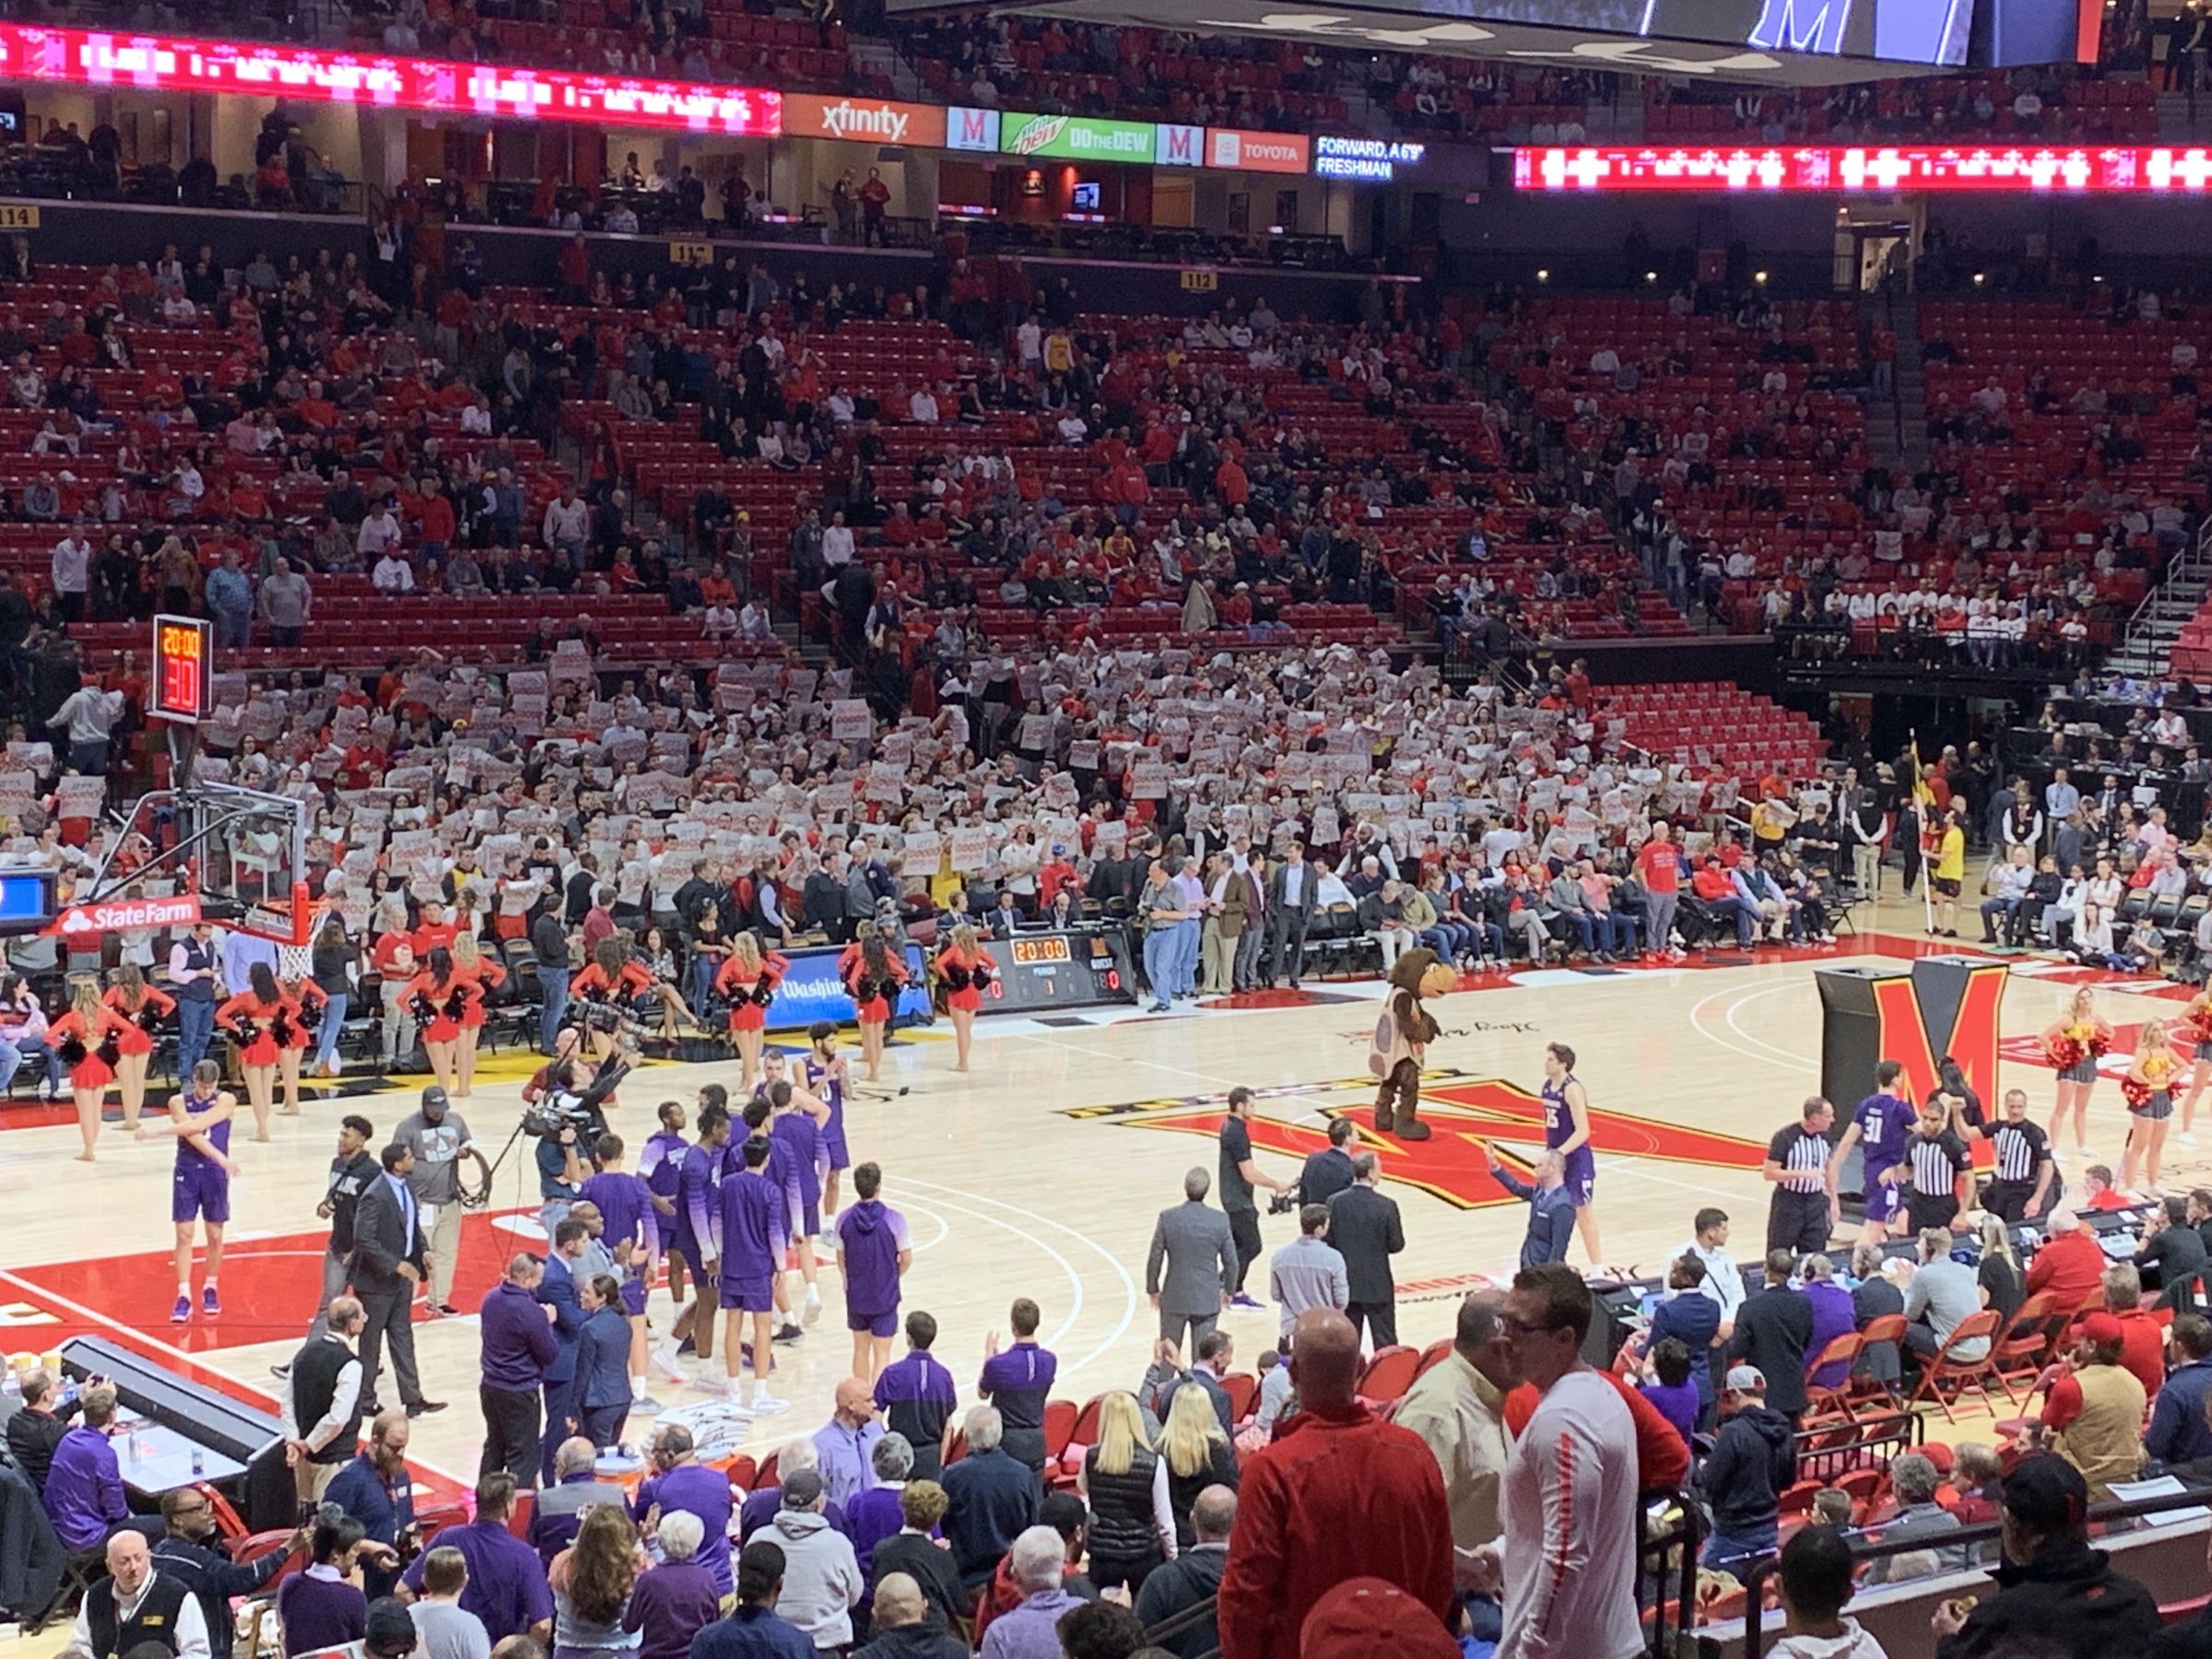 section 125, row 10 seat view  - xfinity center (maryland)